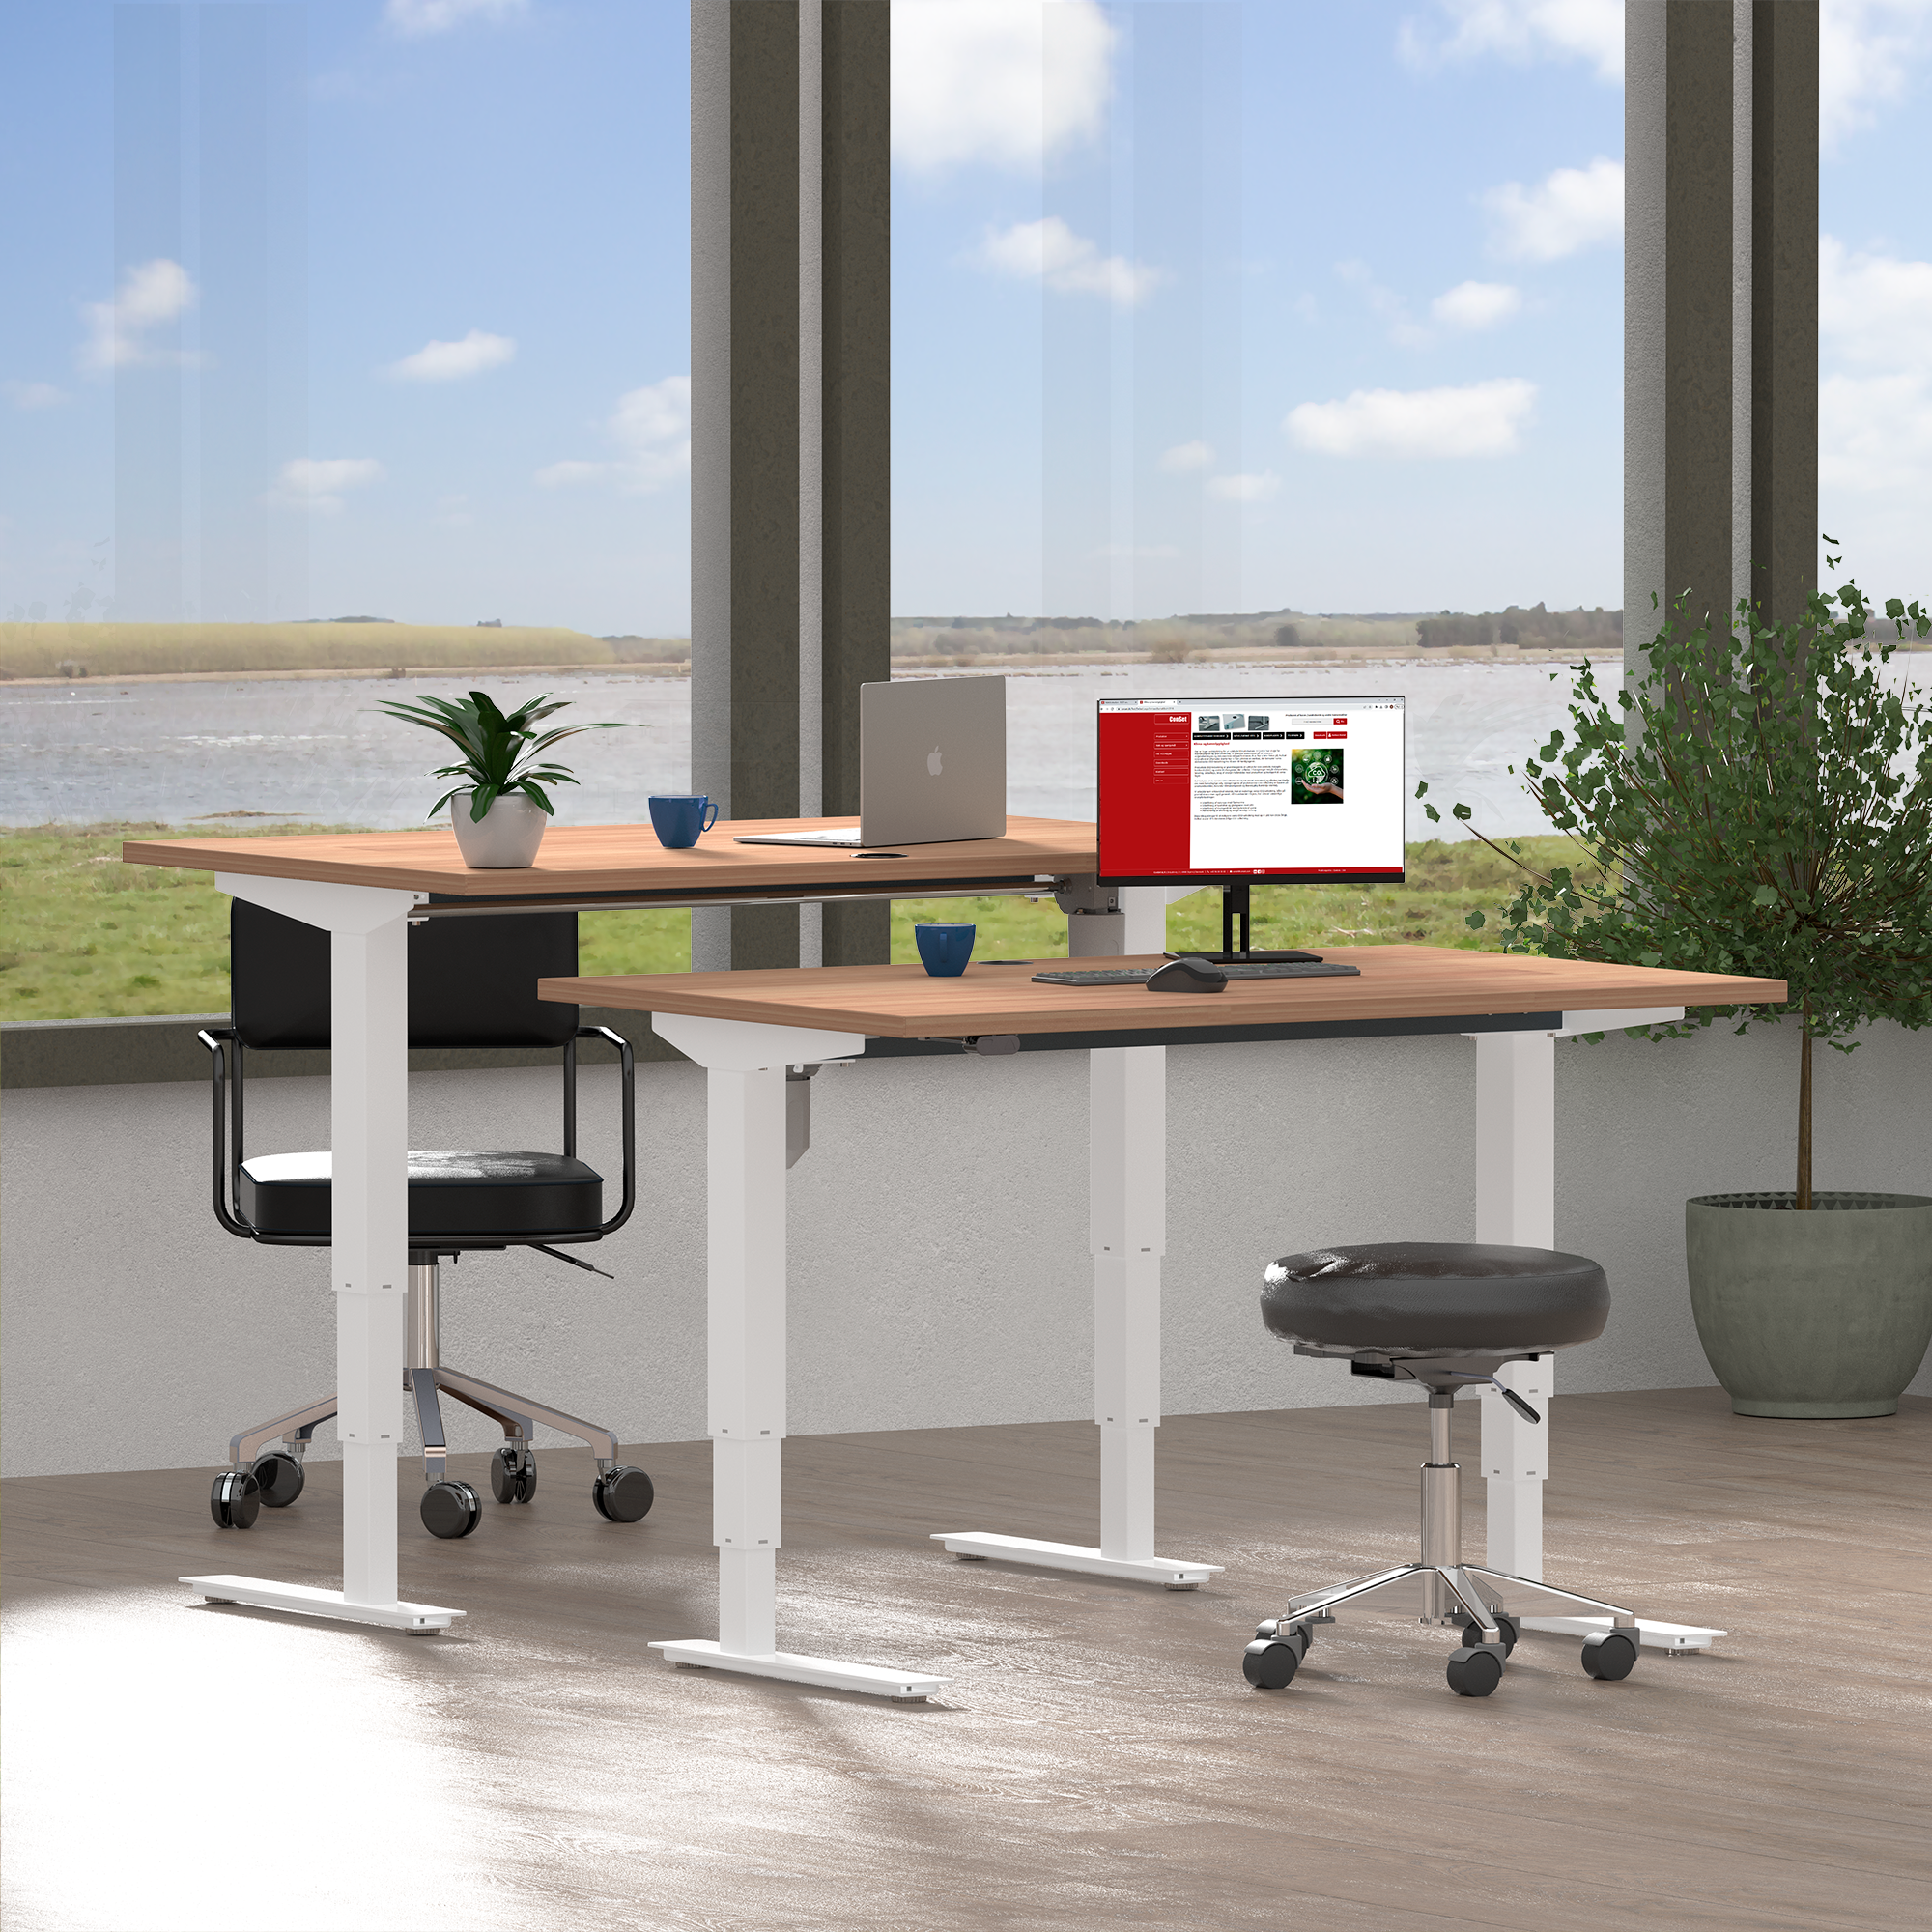 Electric Adjustable Desk | 100x60 cm | Beech with white frame